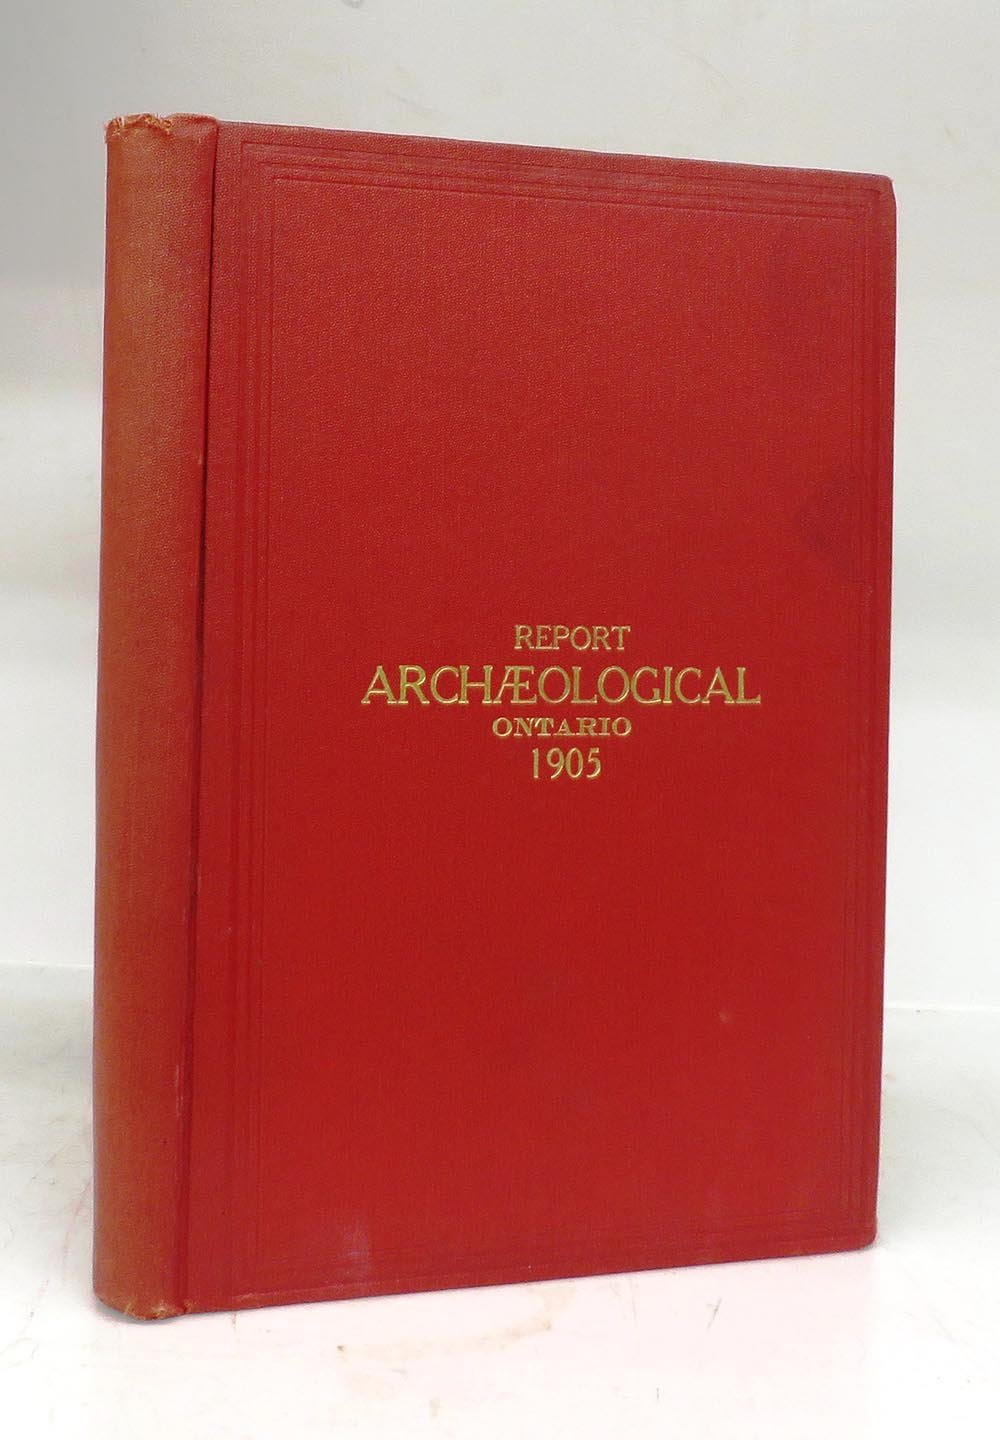 Annual Archaeological Report 1905 Being Part of Appendix to the Report of The Minister of Education Ontario